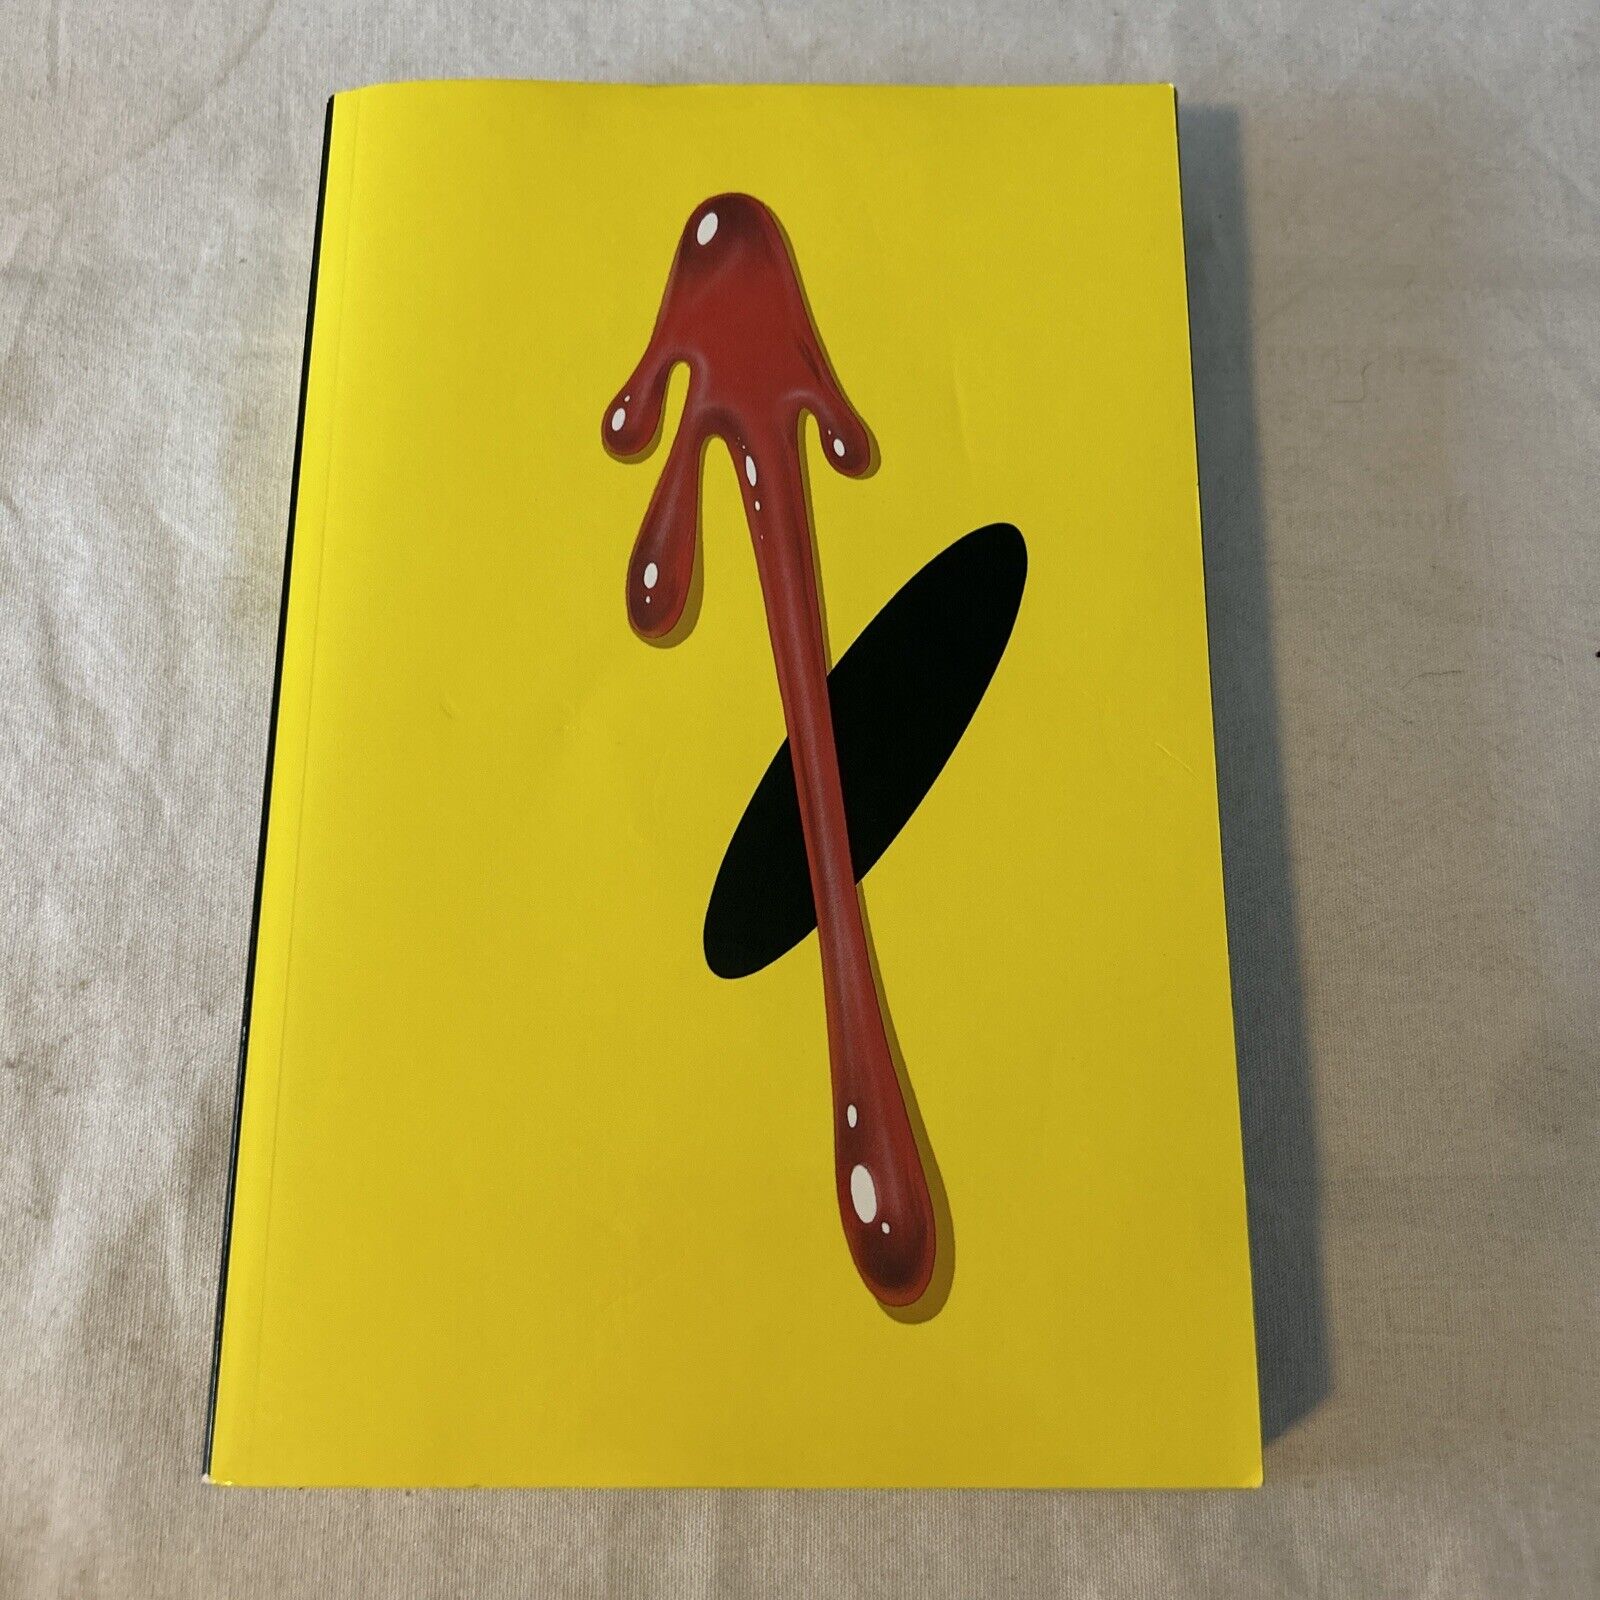 Watchmen Absolute Edition (paperback, 2014)